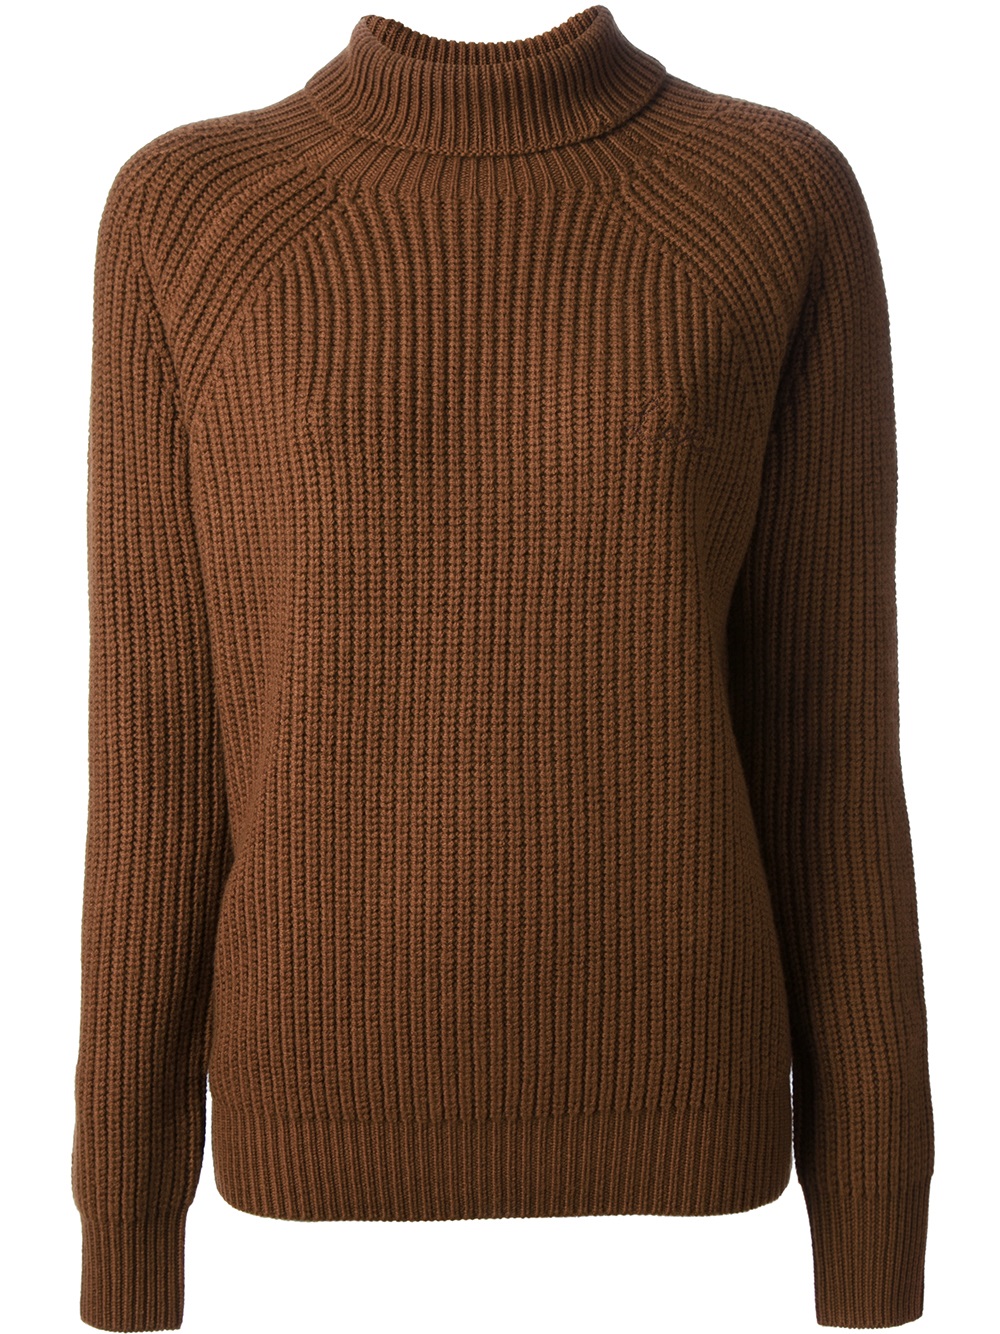 Golden goose deluxe brand Ribbed Knit Polo Neck Sweater in Brown | Lyst